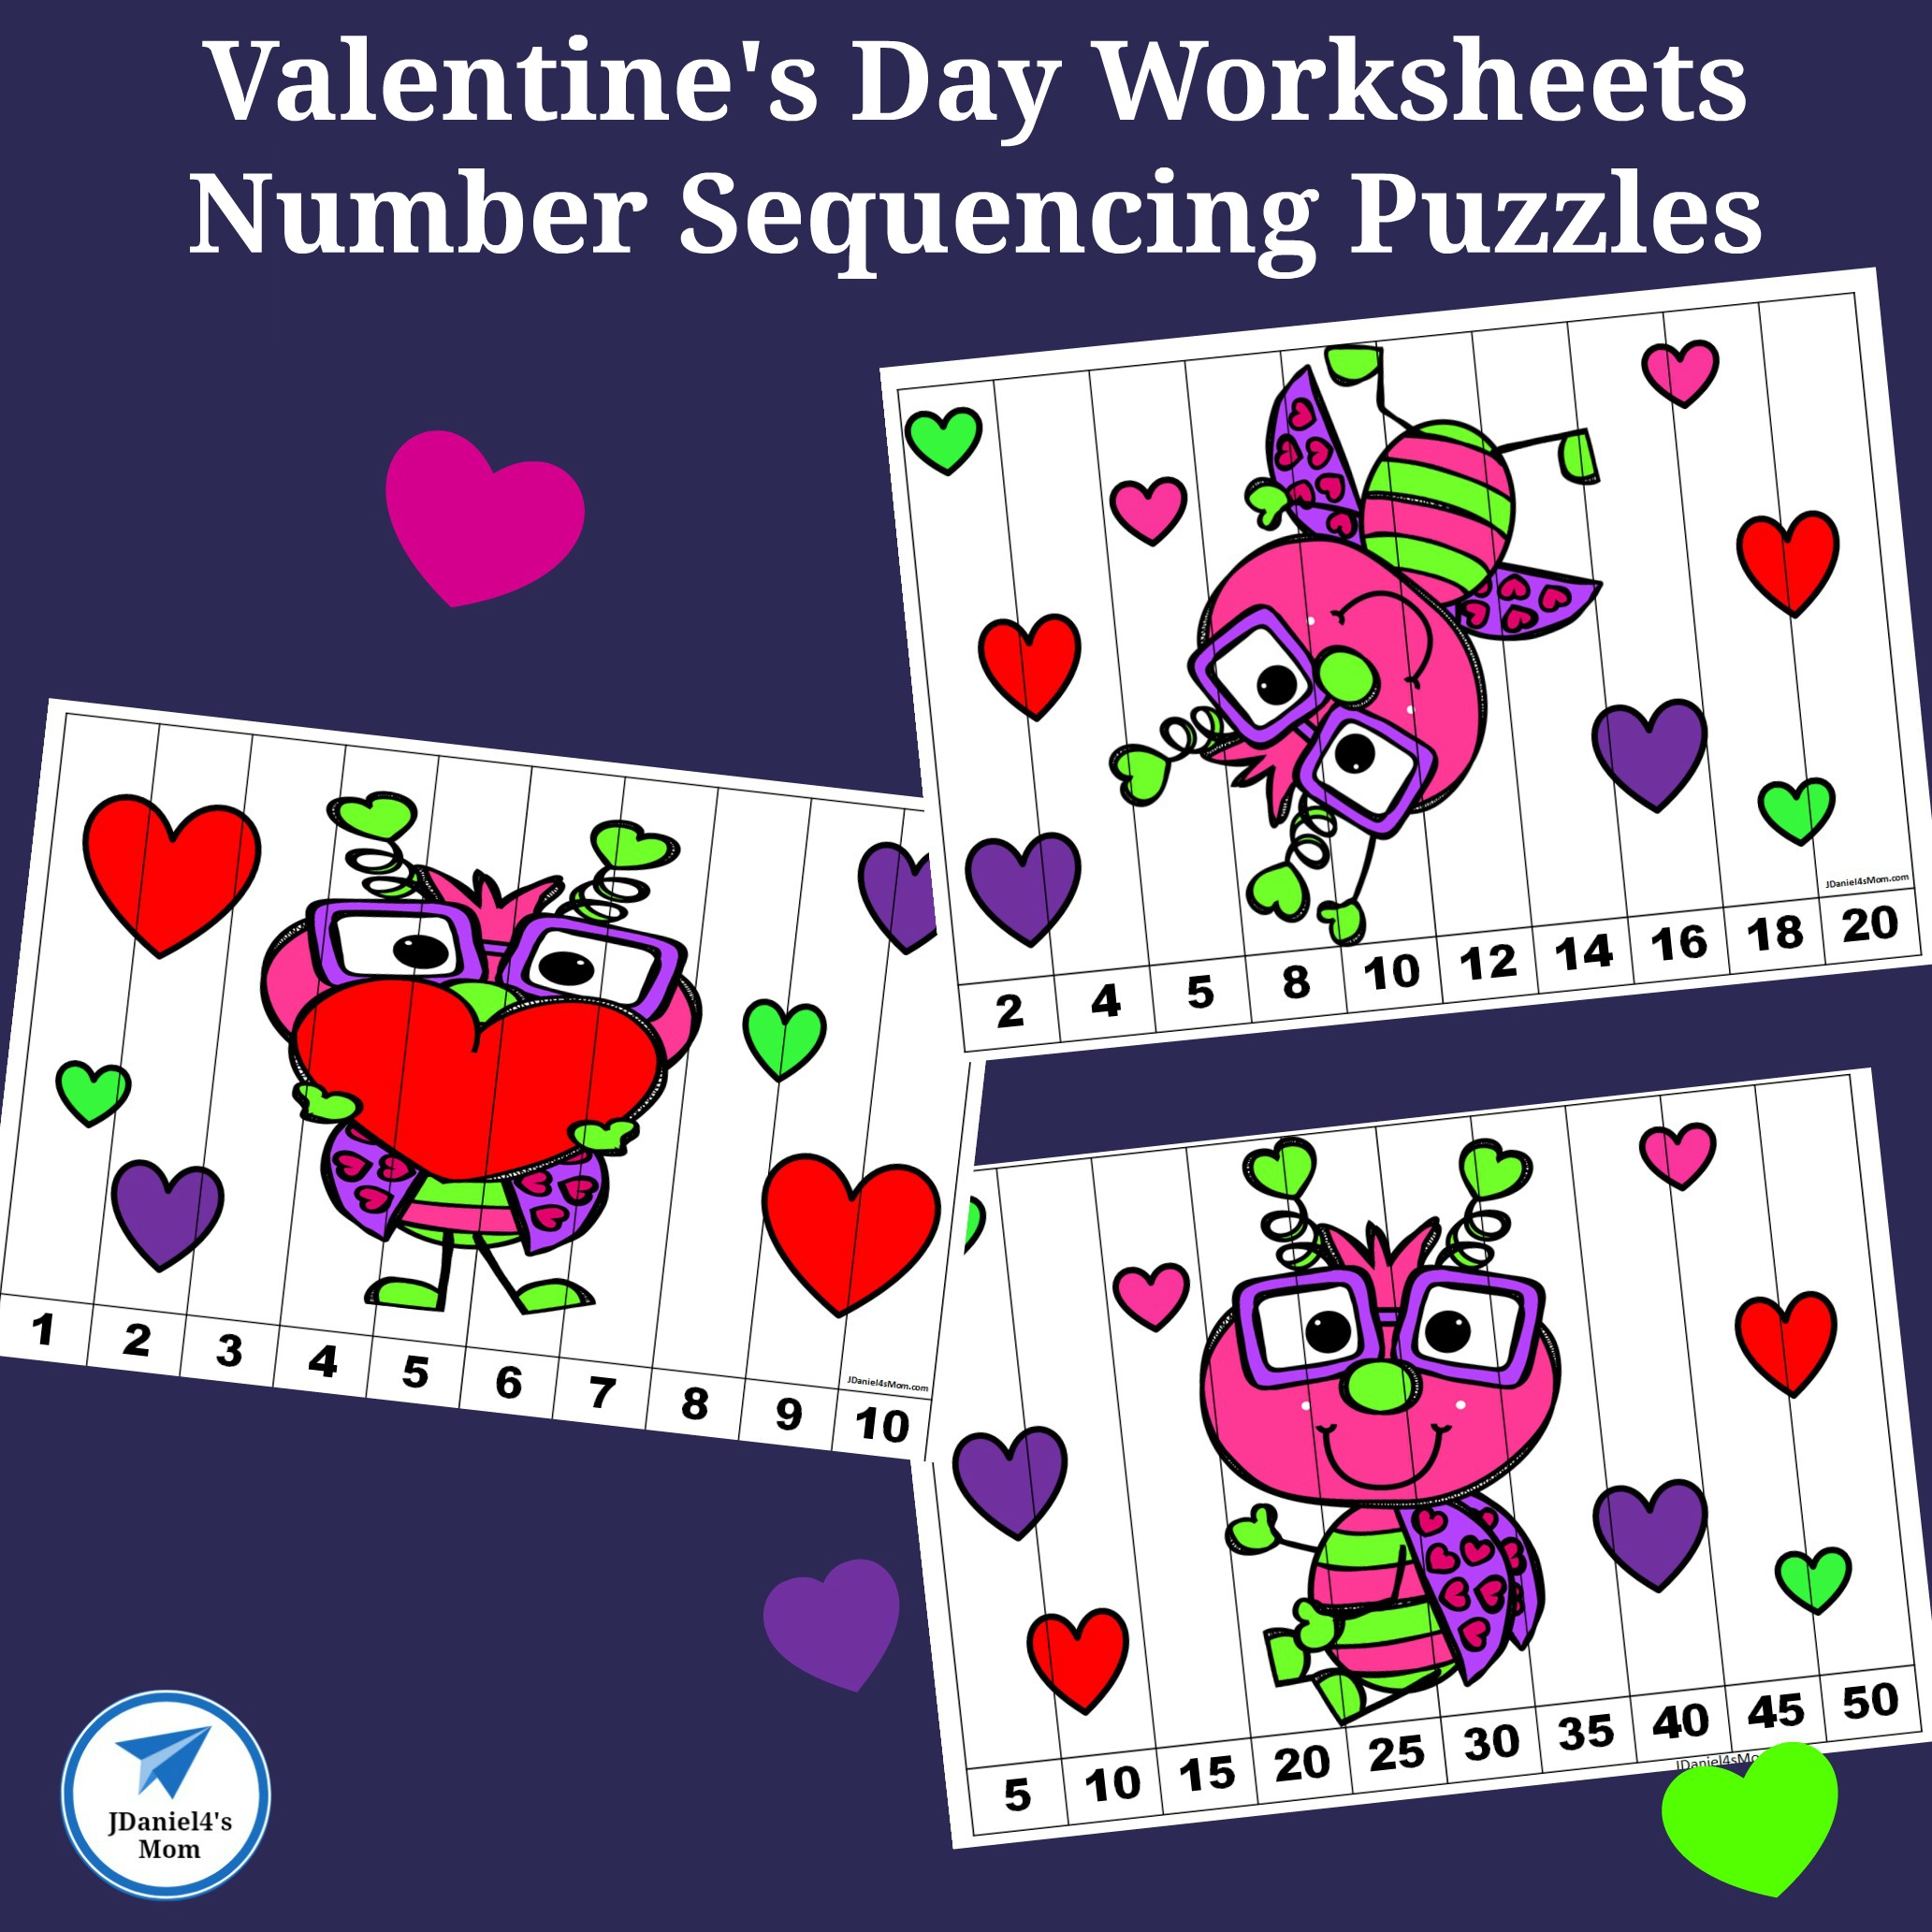 Valentine's Day Worksheets - Sequencing Number Puzzles Facebook